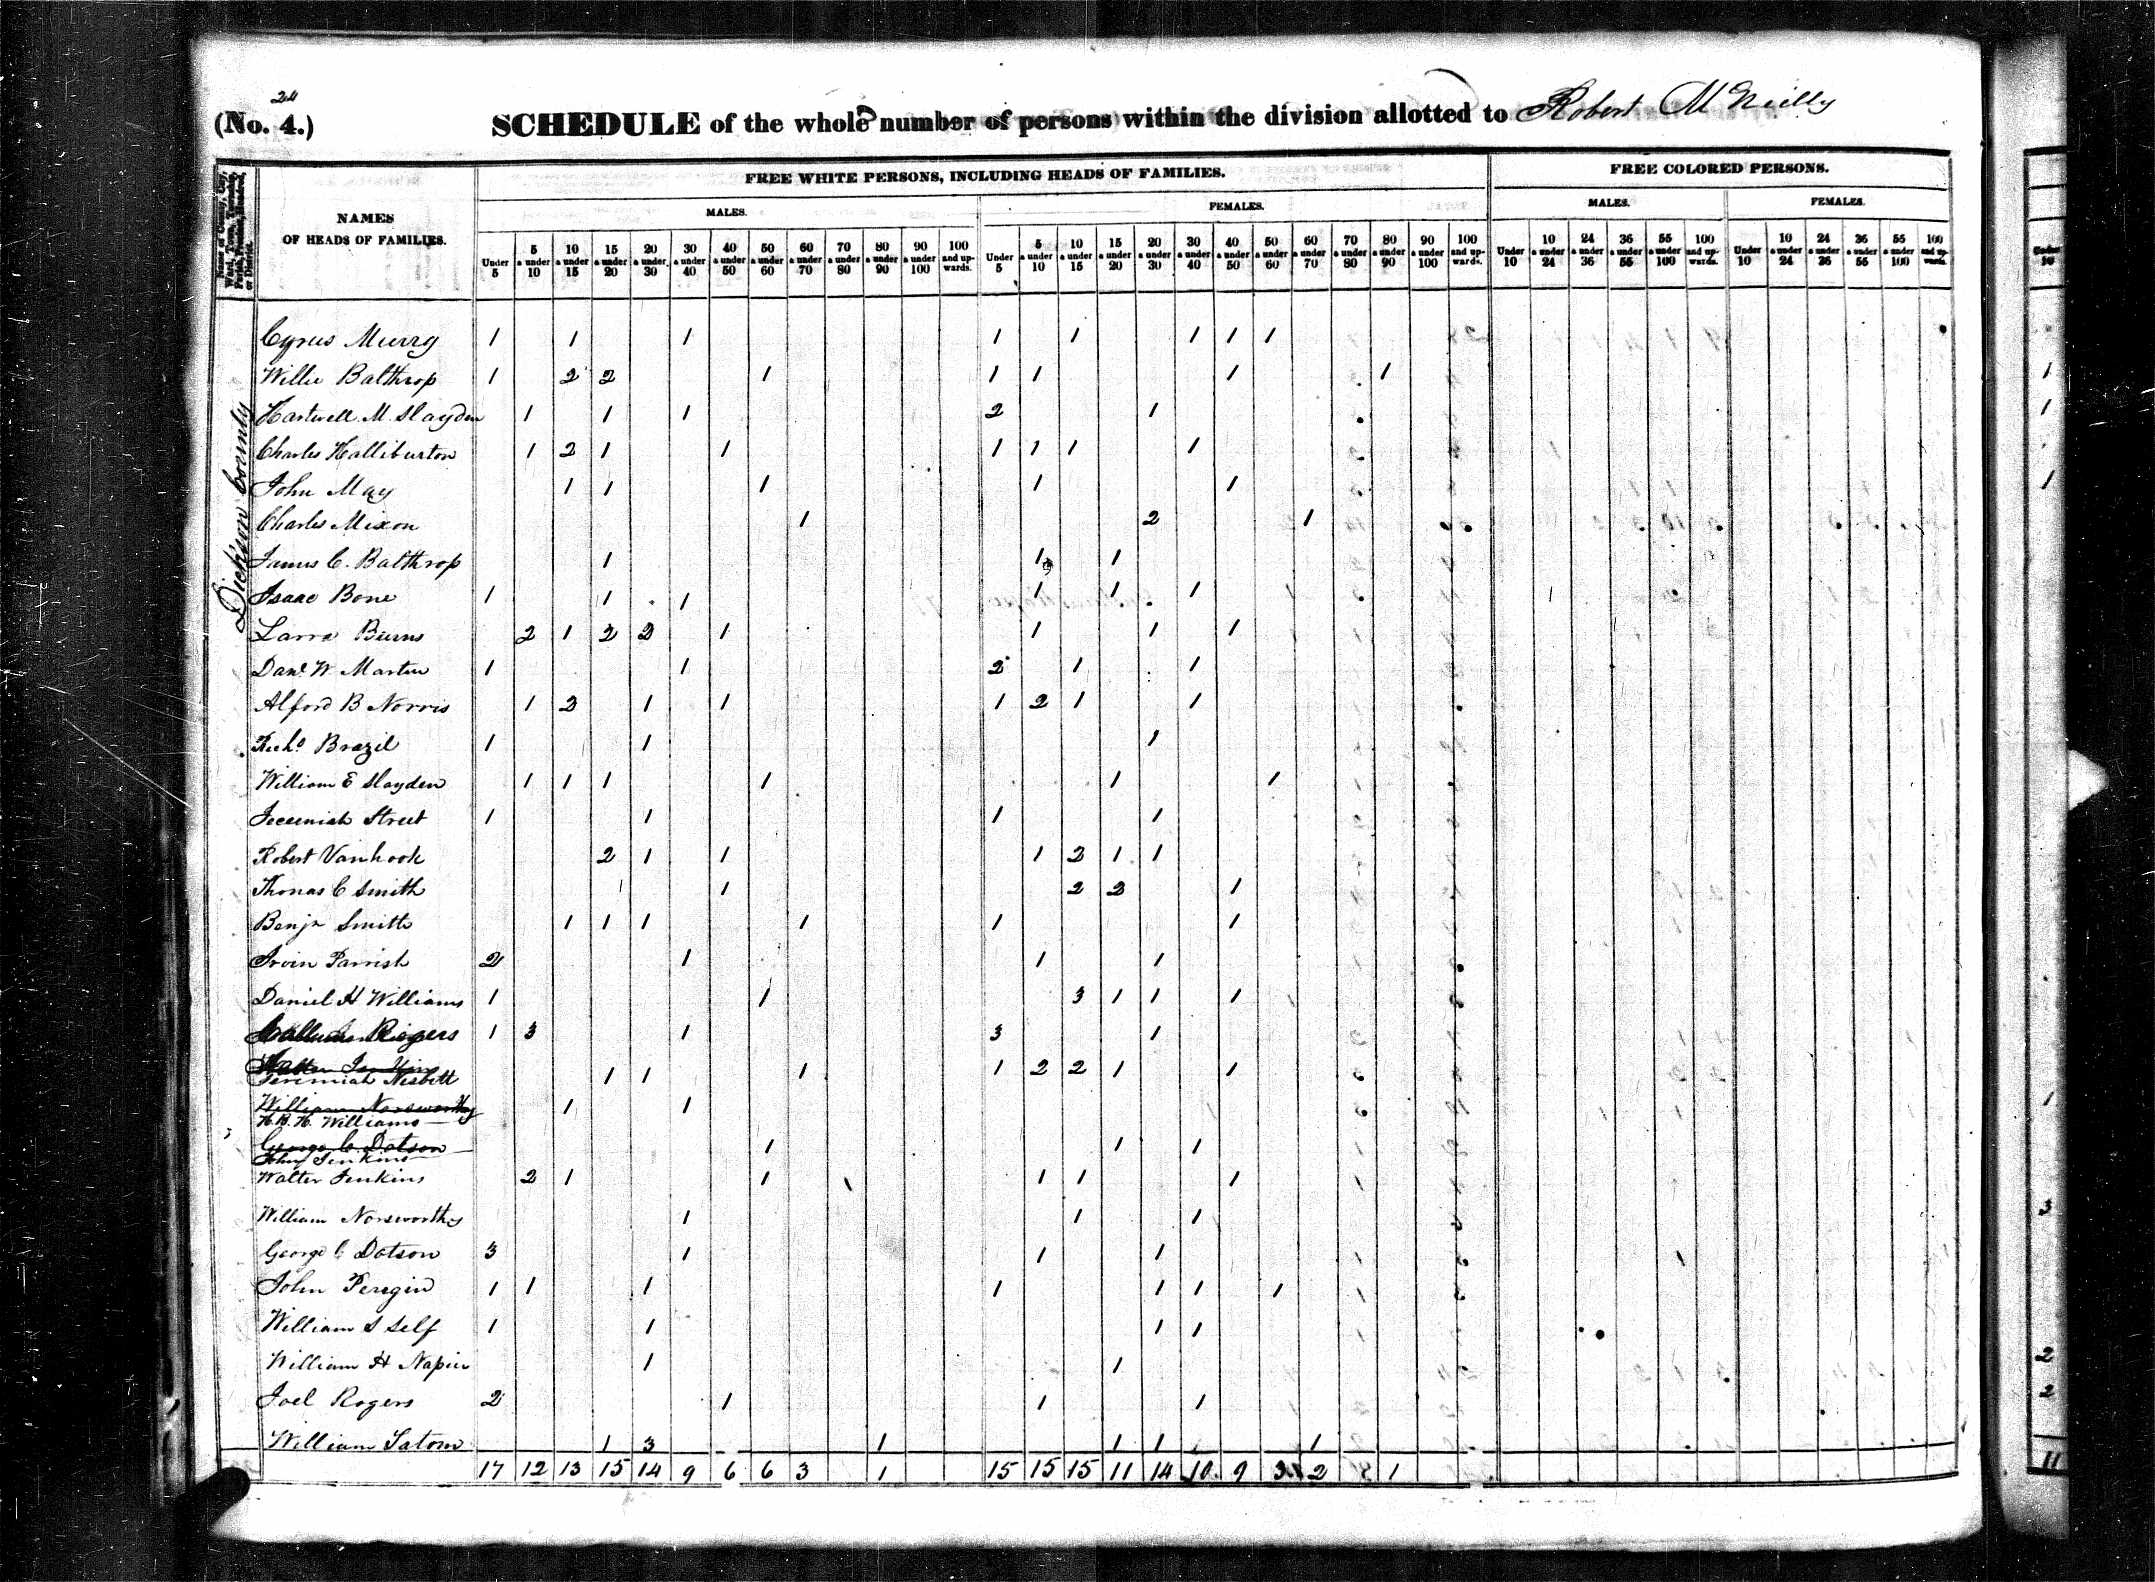 Richmond Brazzell, 1840 Dickson County, Tennessee, census; with wife Annice Evans and son, G.W.